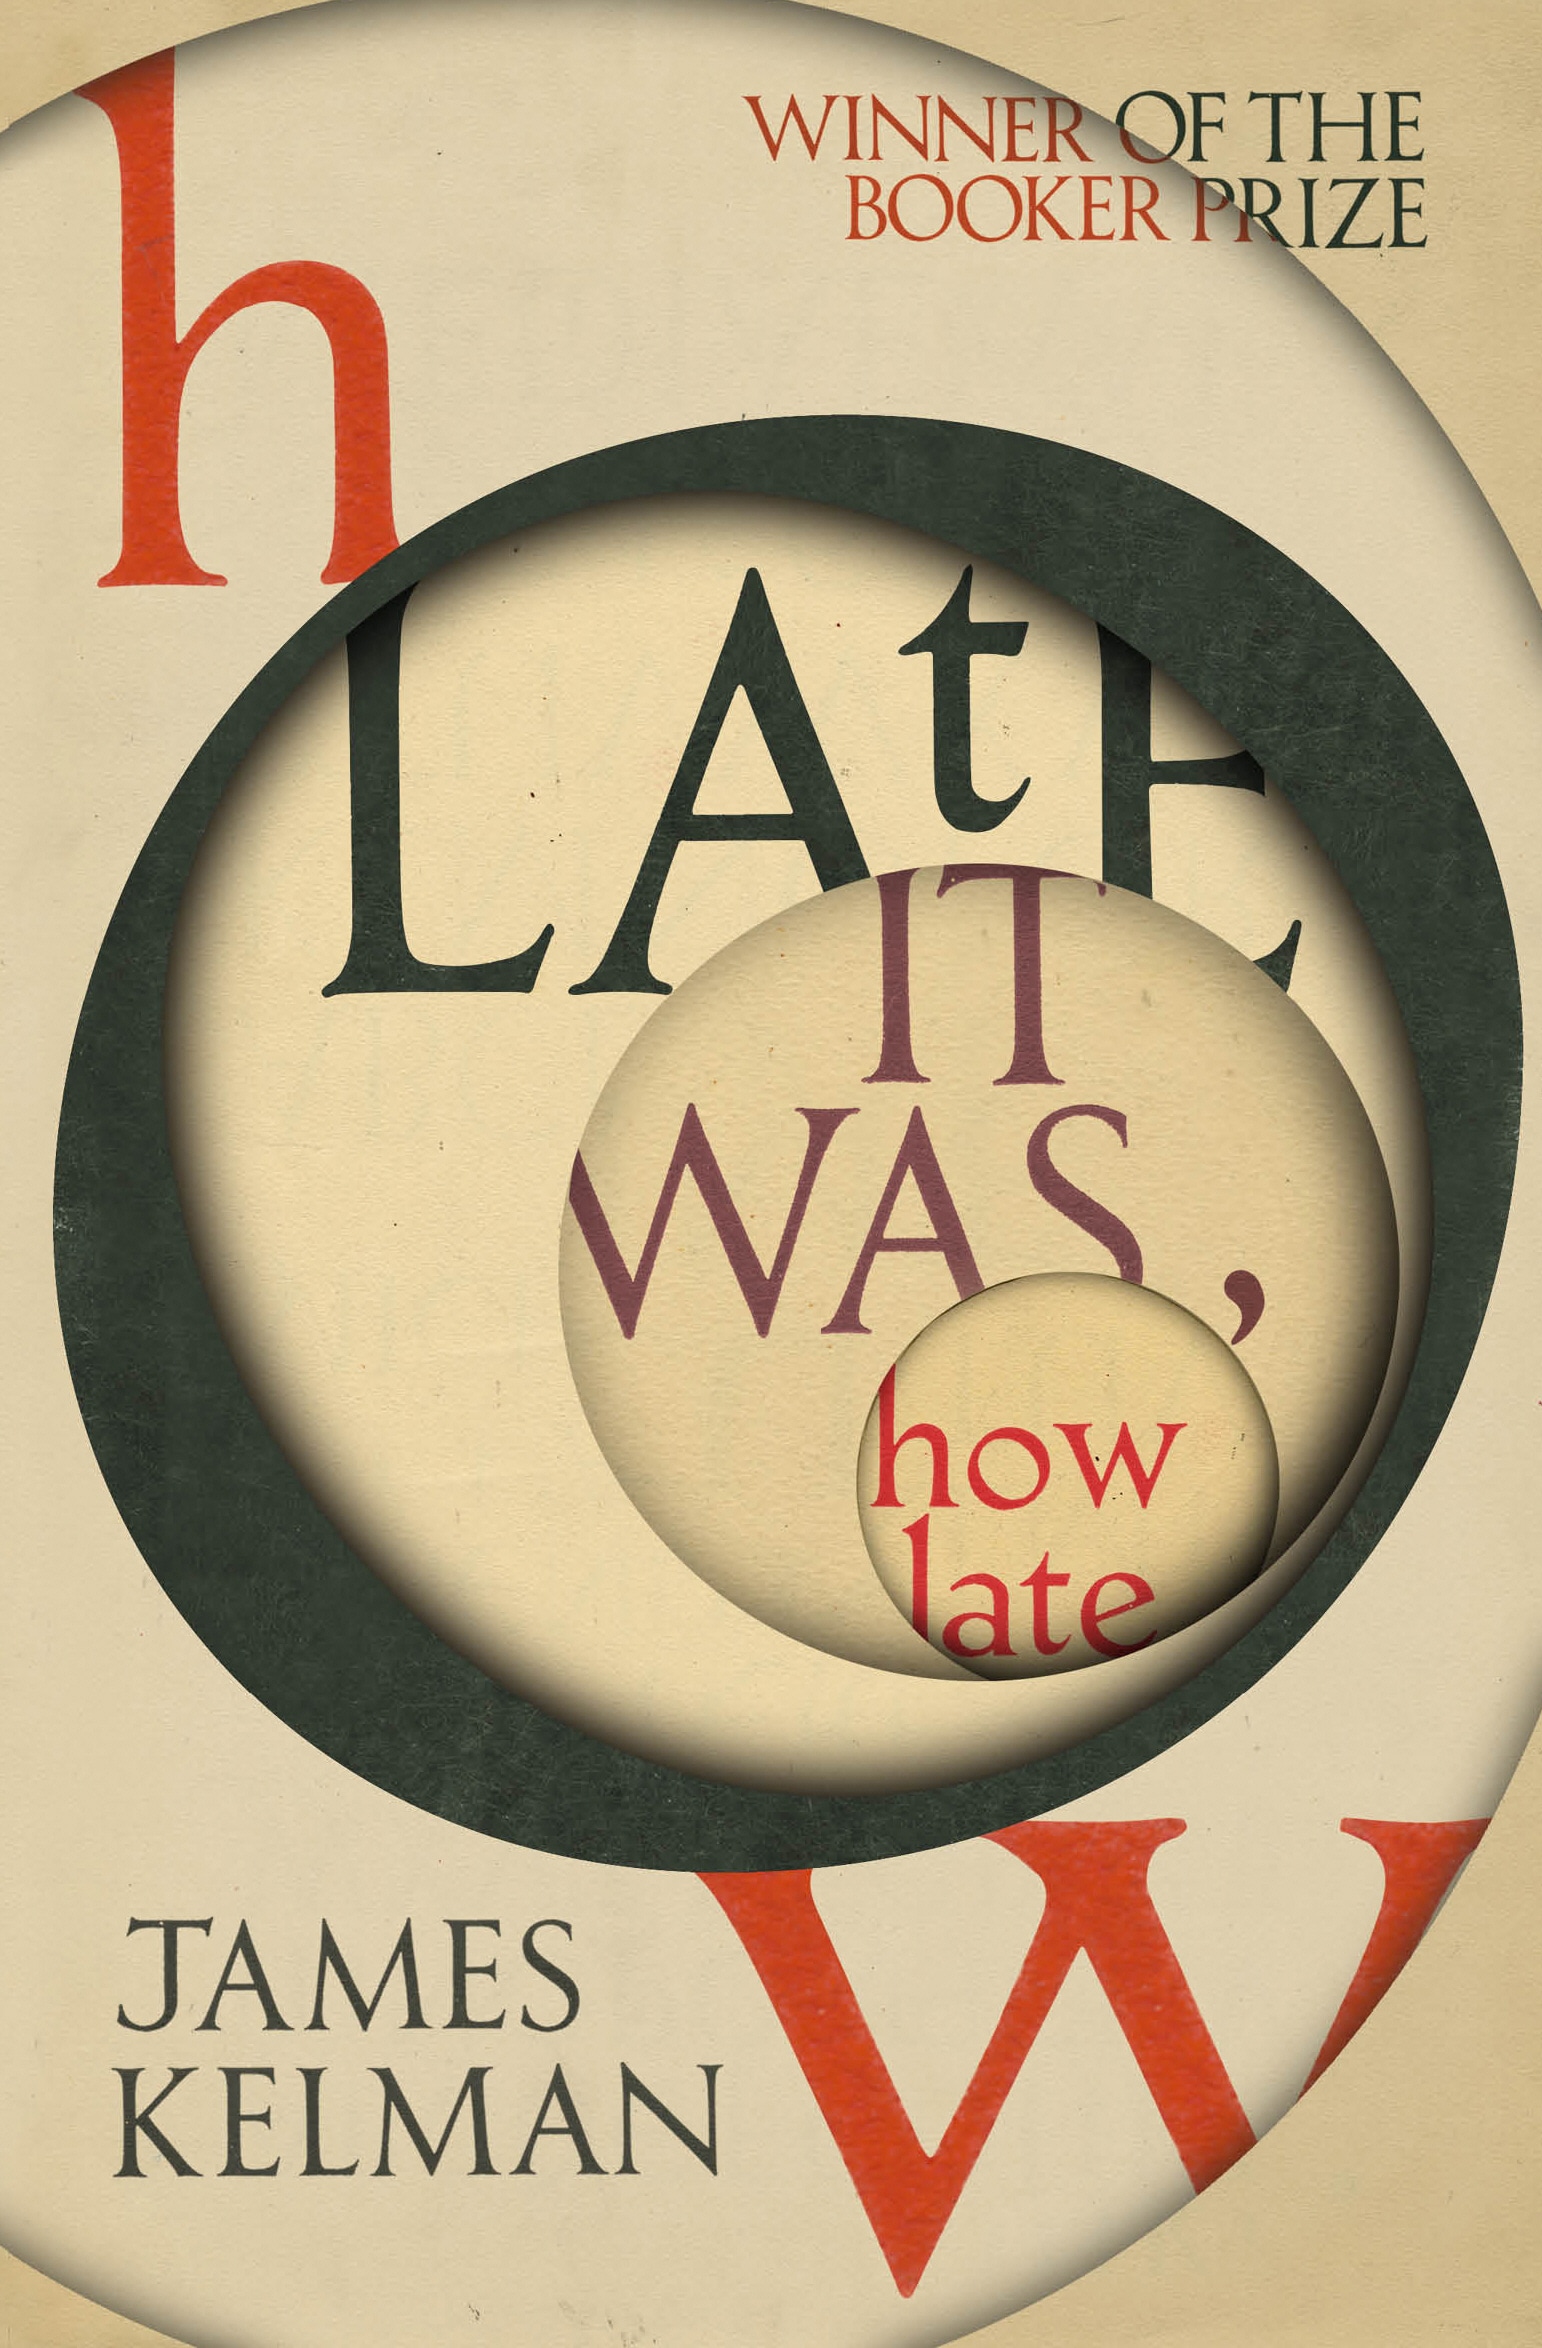 Book “How Late It Was How Late” by James Kelman — September 5, 2019